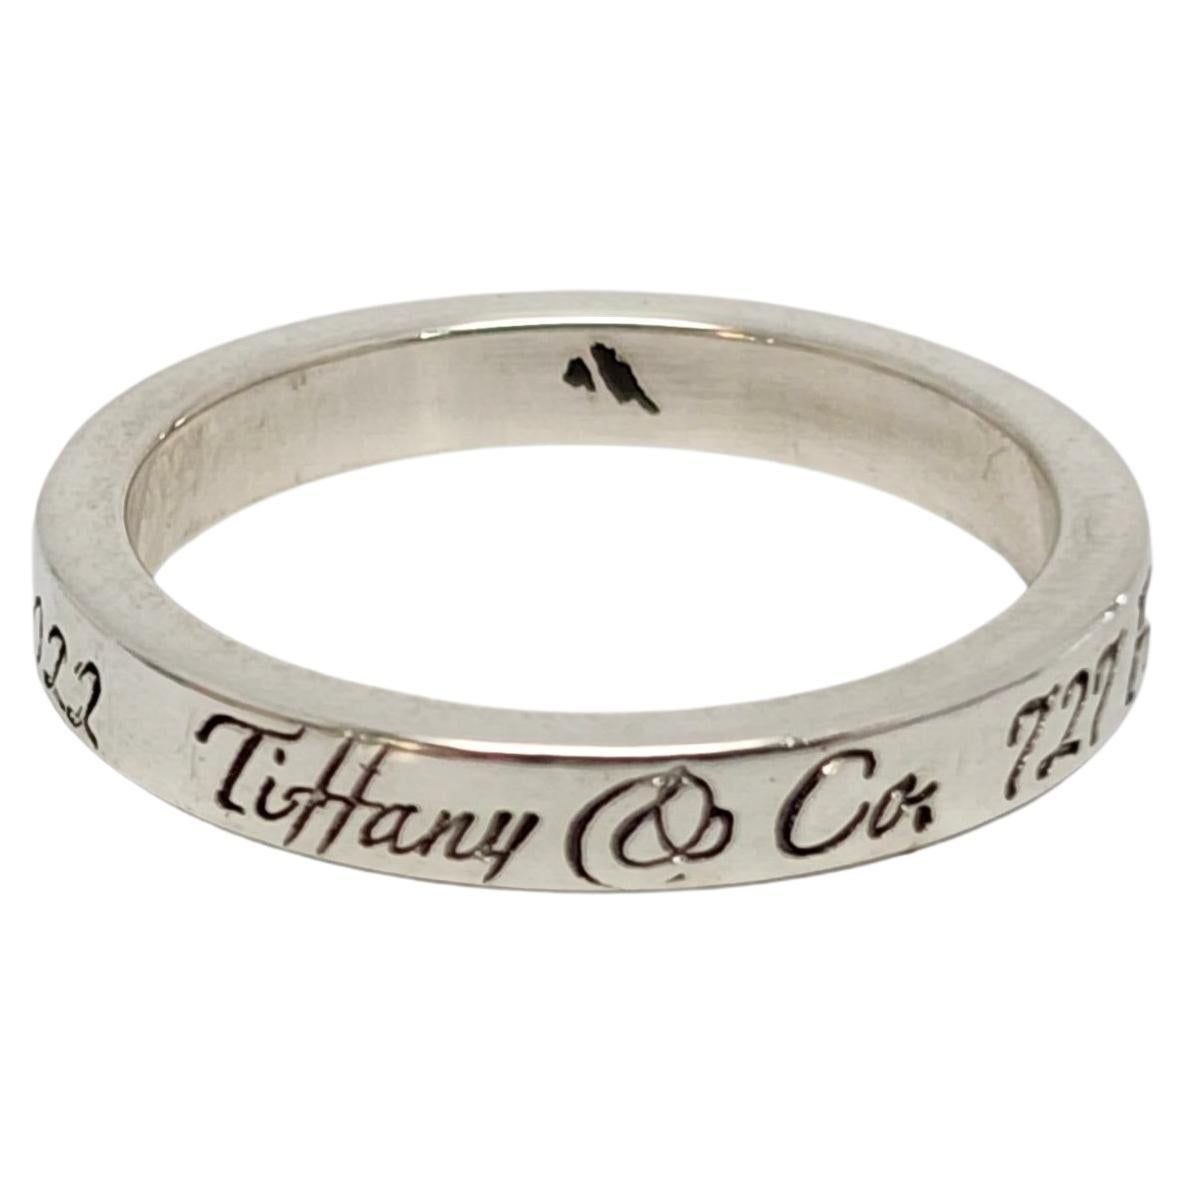 Tiffany & Co New York Address Notes Narrow Band Ring Taille 5,25 n°13007